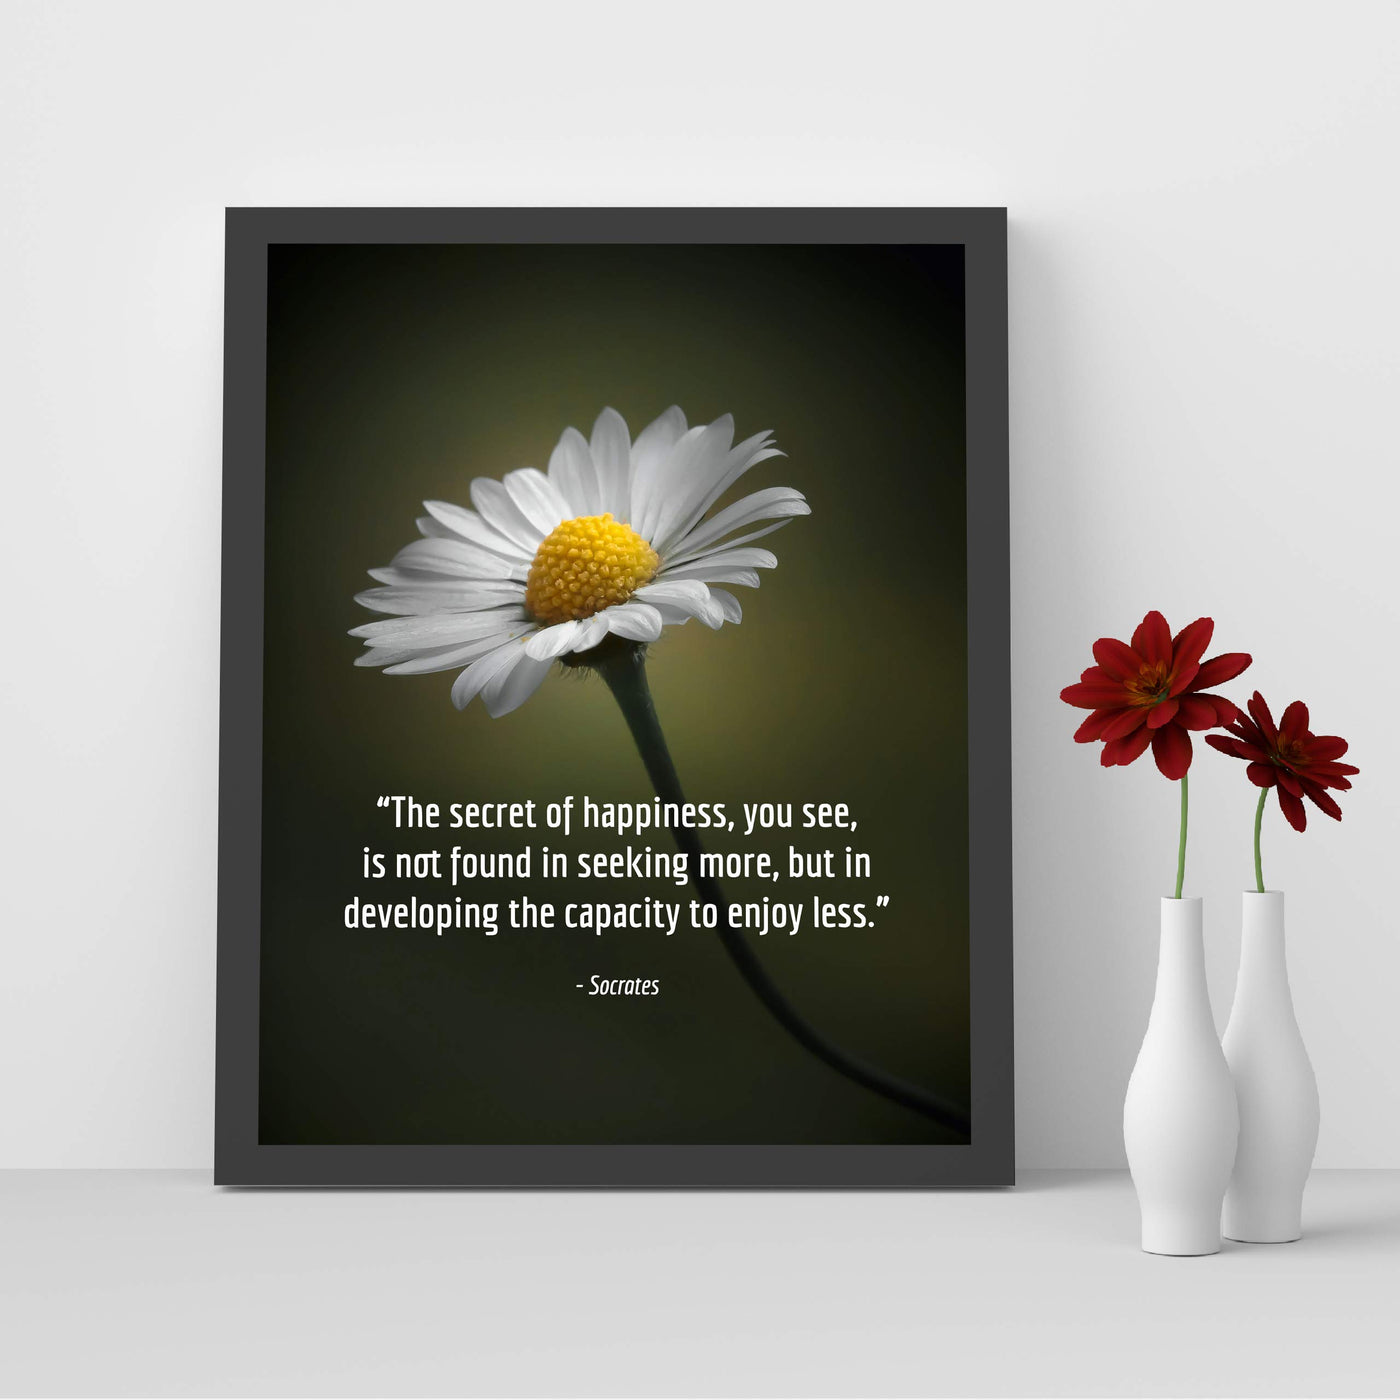 Socrates Quotes Wall Art-"Secret To Happiness-Developing Capacity to Enjoy Less" -8 x 10" Motivational Wall Print-Ready to Frame. Modern Typographic Design. Inspirational Home-Office-School Decor.